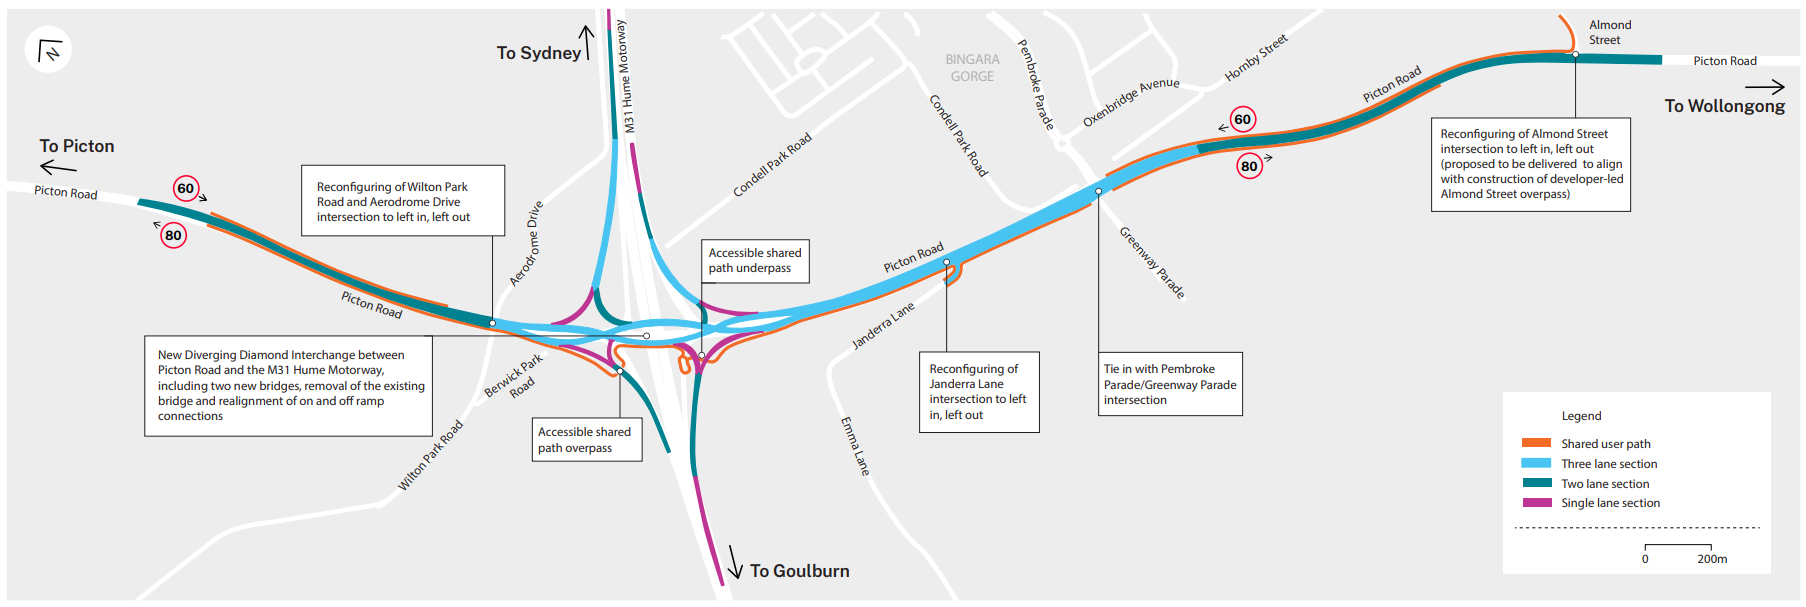 picton-road-upgrade-western-section-map